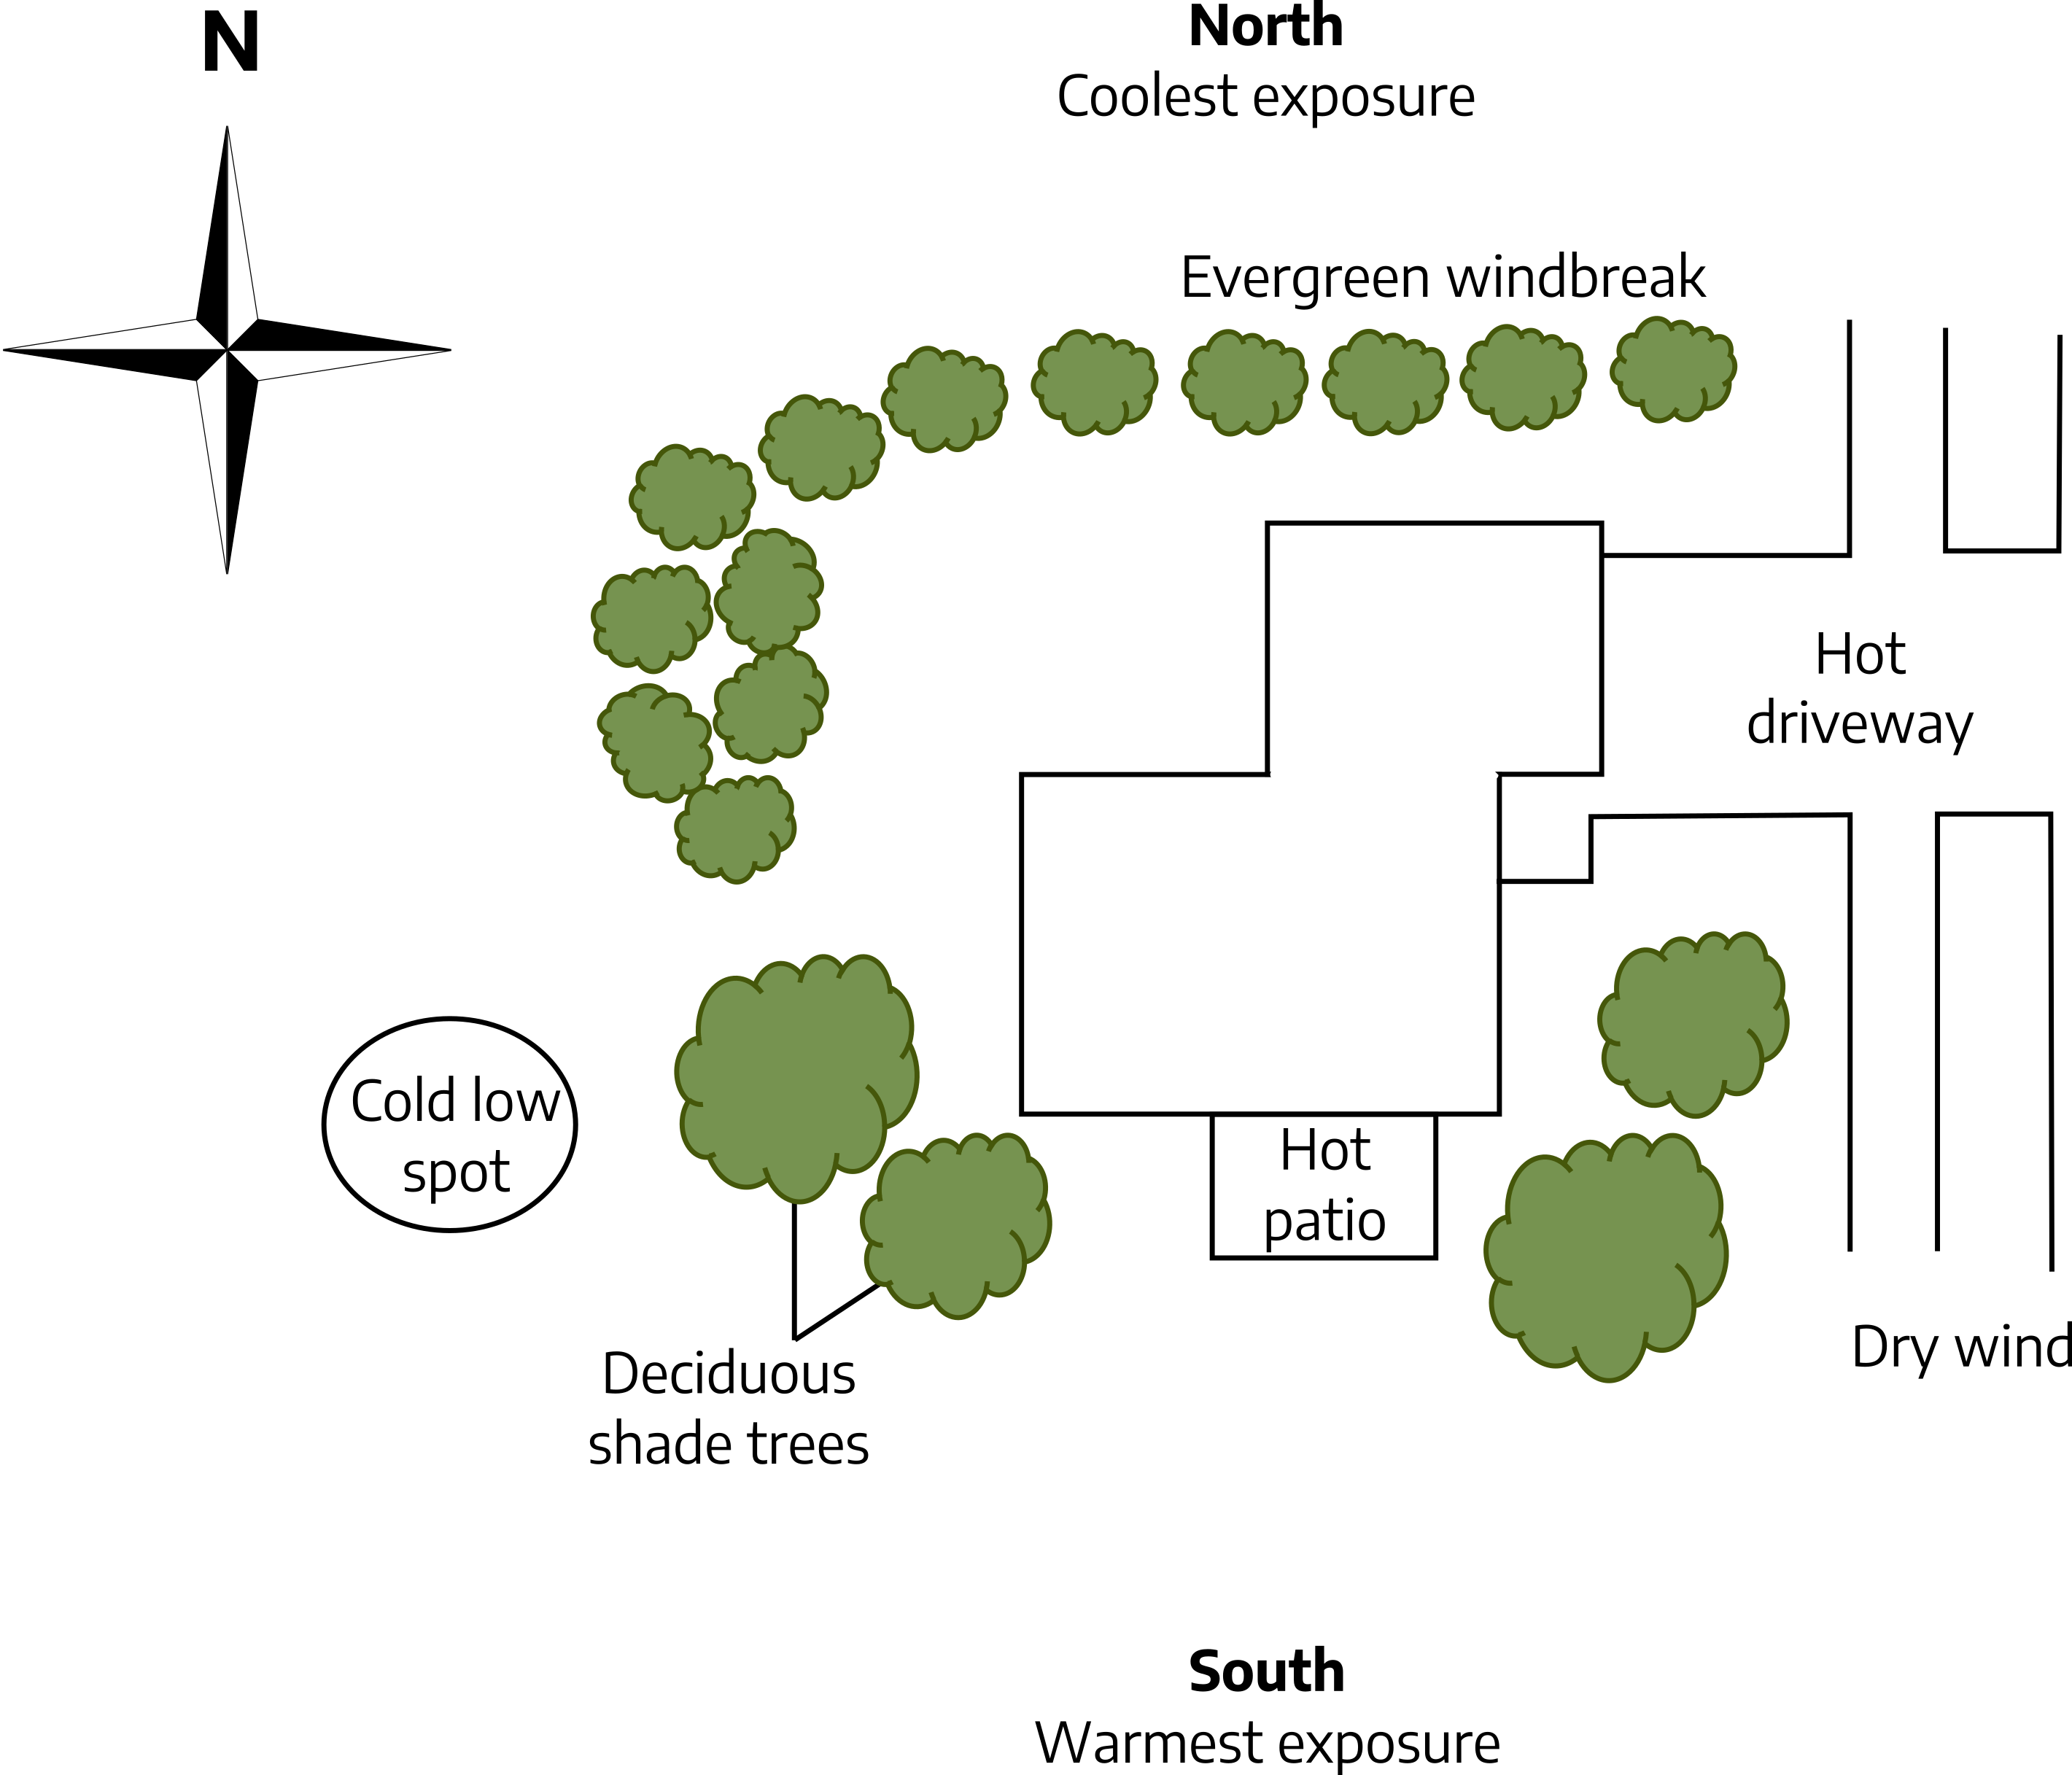 A diagram of a house plan. The house drawing is a thin black line, showing a hot patio, hot driveway. A dry wind is marked on the lower right side, a cold low spot are on the left side of the drawing. Around the house are deciduous shade trees on the lower left and right sides drawn as a round bumpy green shape. On the upper right side of the drawing is an evergreen windbreak shown as smaller round bumpy green shapes. North, the top of the drawing, is coolest exposure; south, the bottom of the drawing, is warmest exposure. There is a compass in the top left corner.